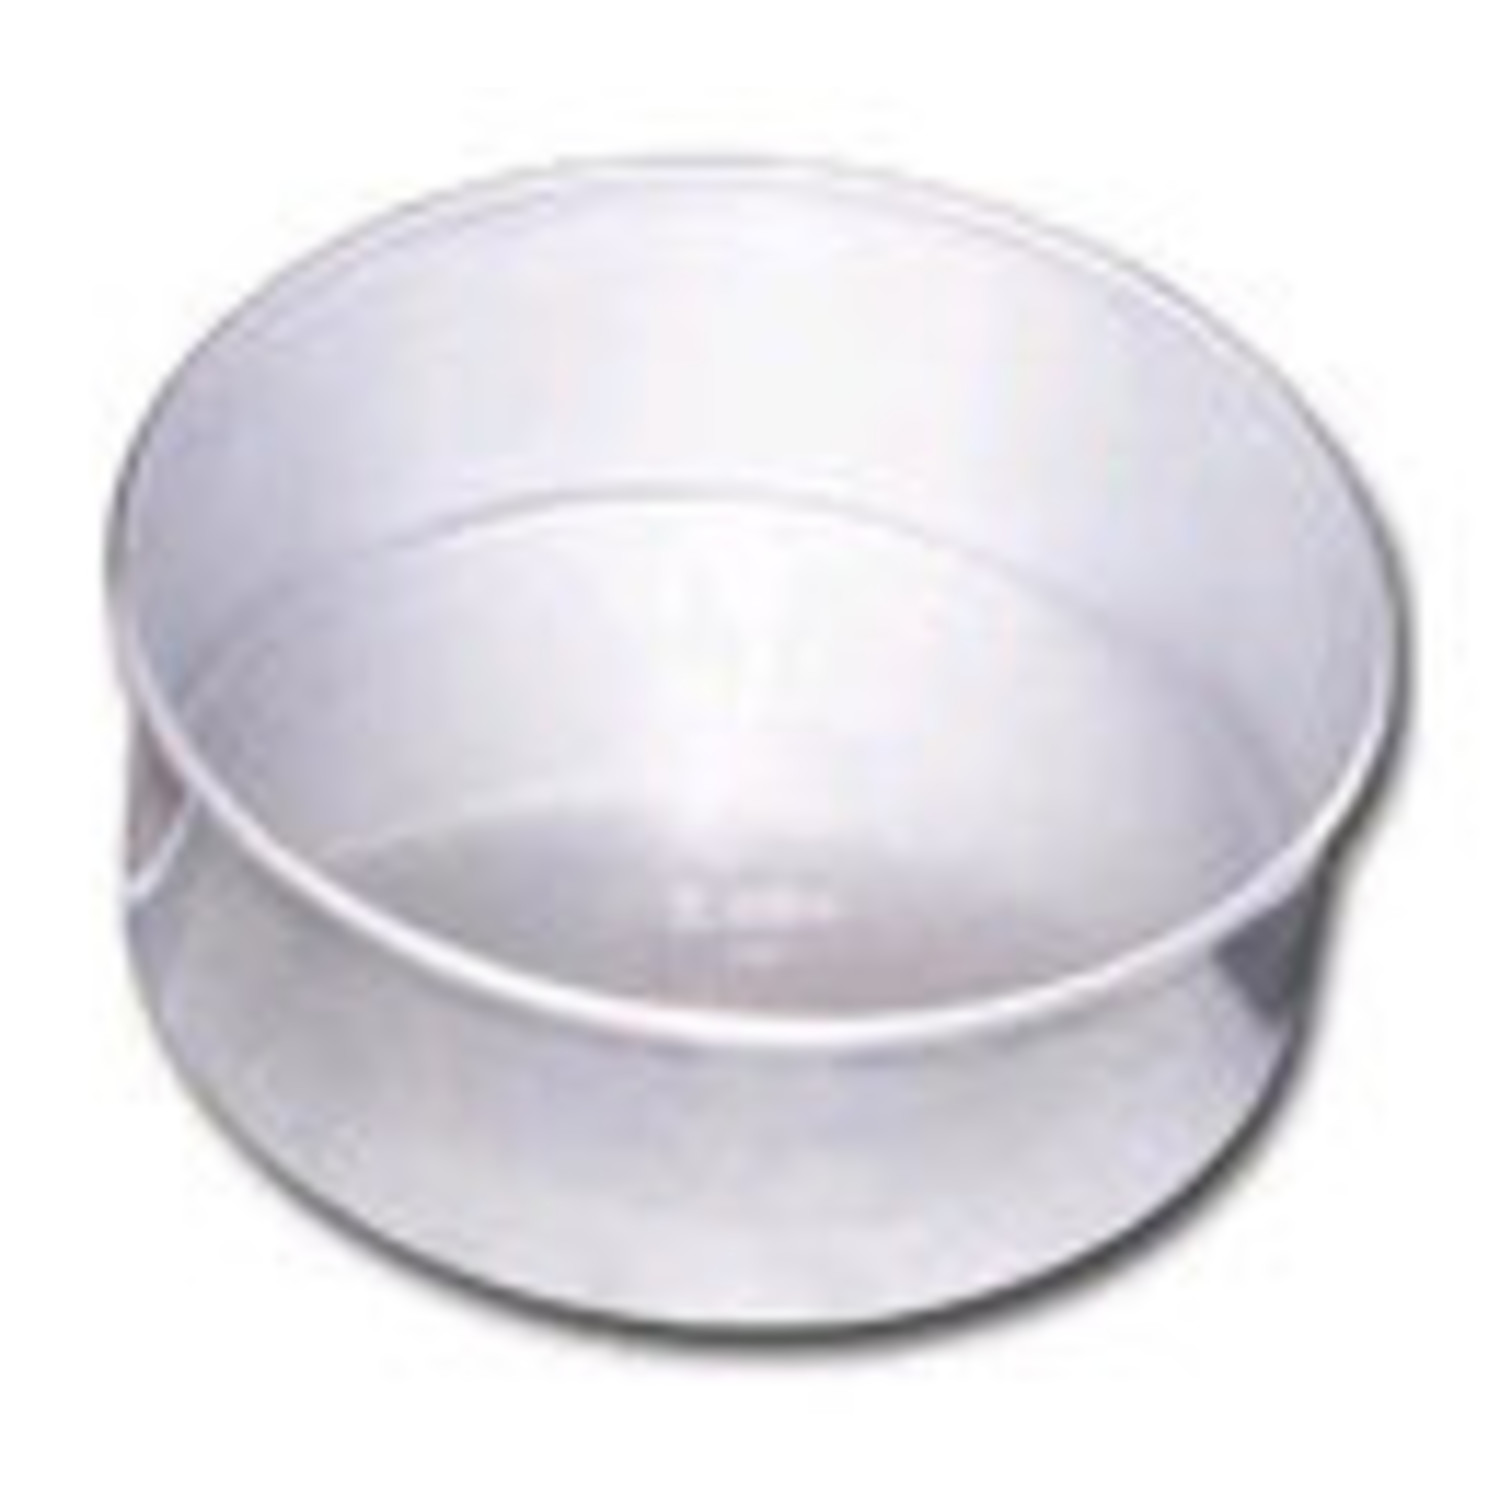 Shop Cake Pans: Round Cake Pans | Ares Kitchen Supplies and Accessories -  Ares Kitchen and Baking Supplies